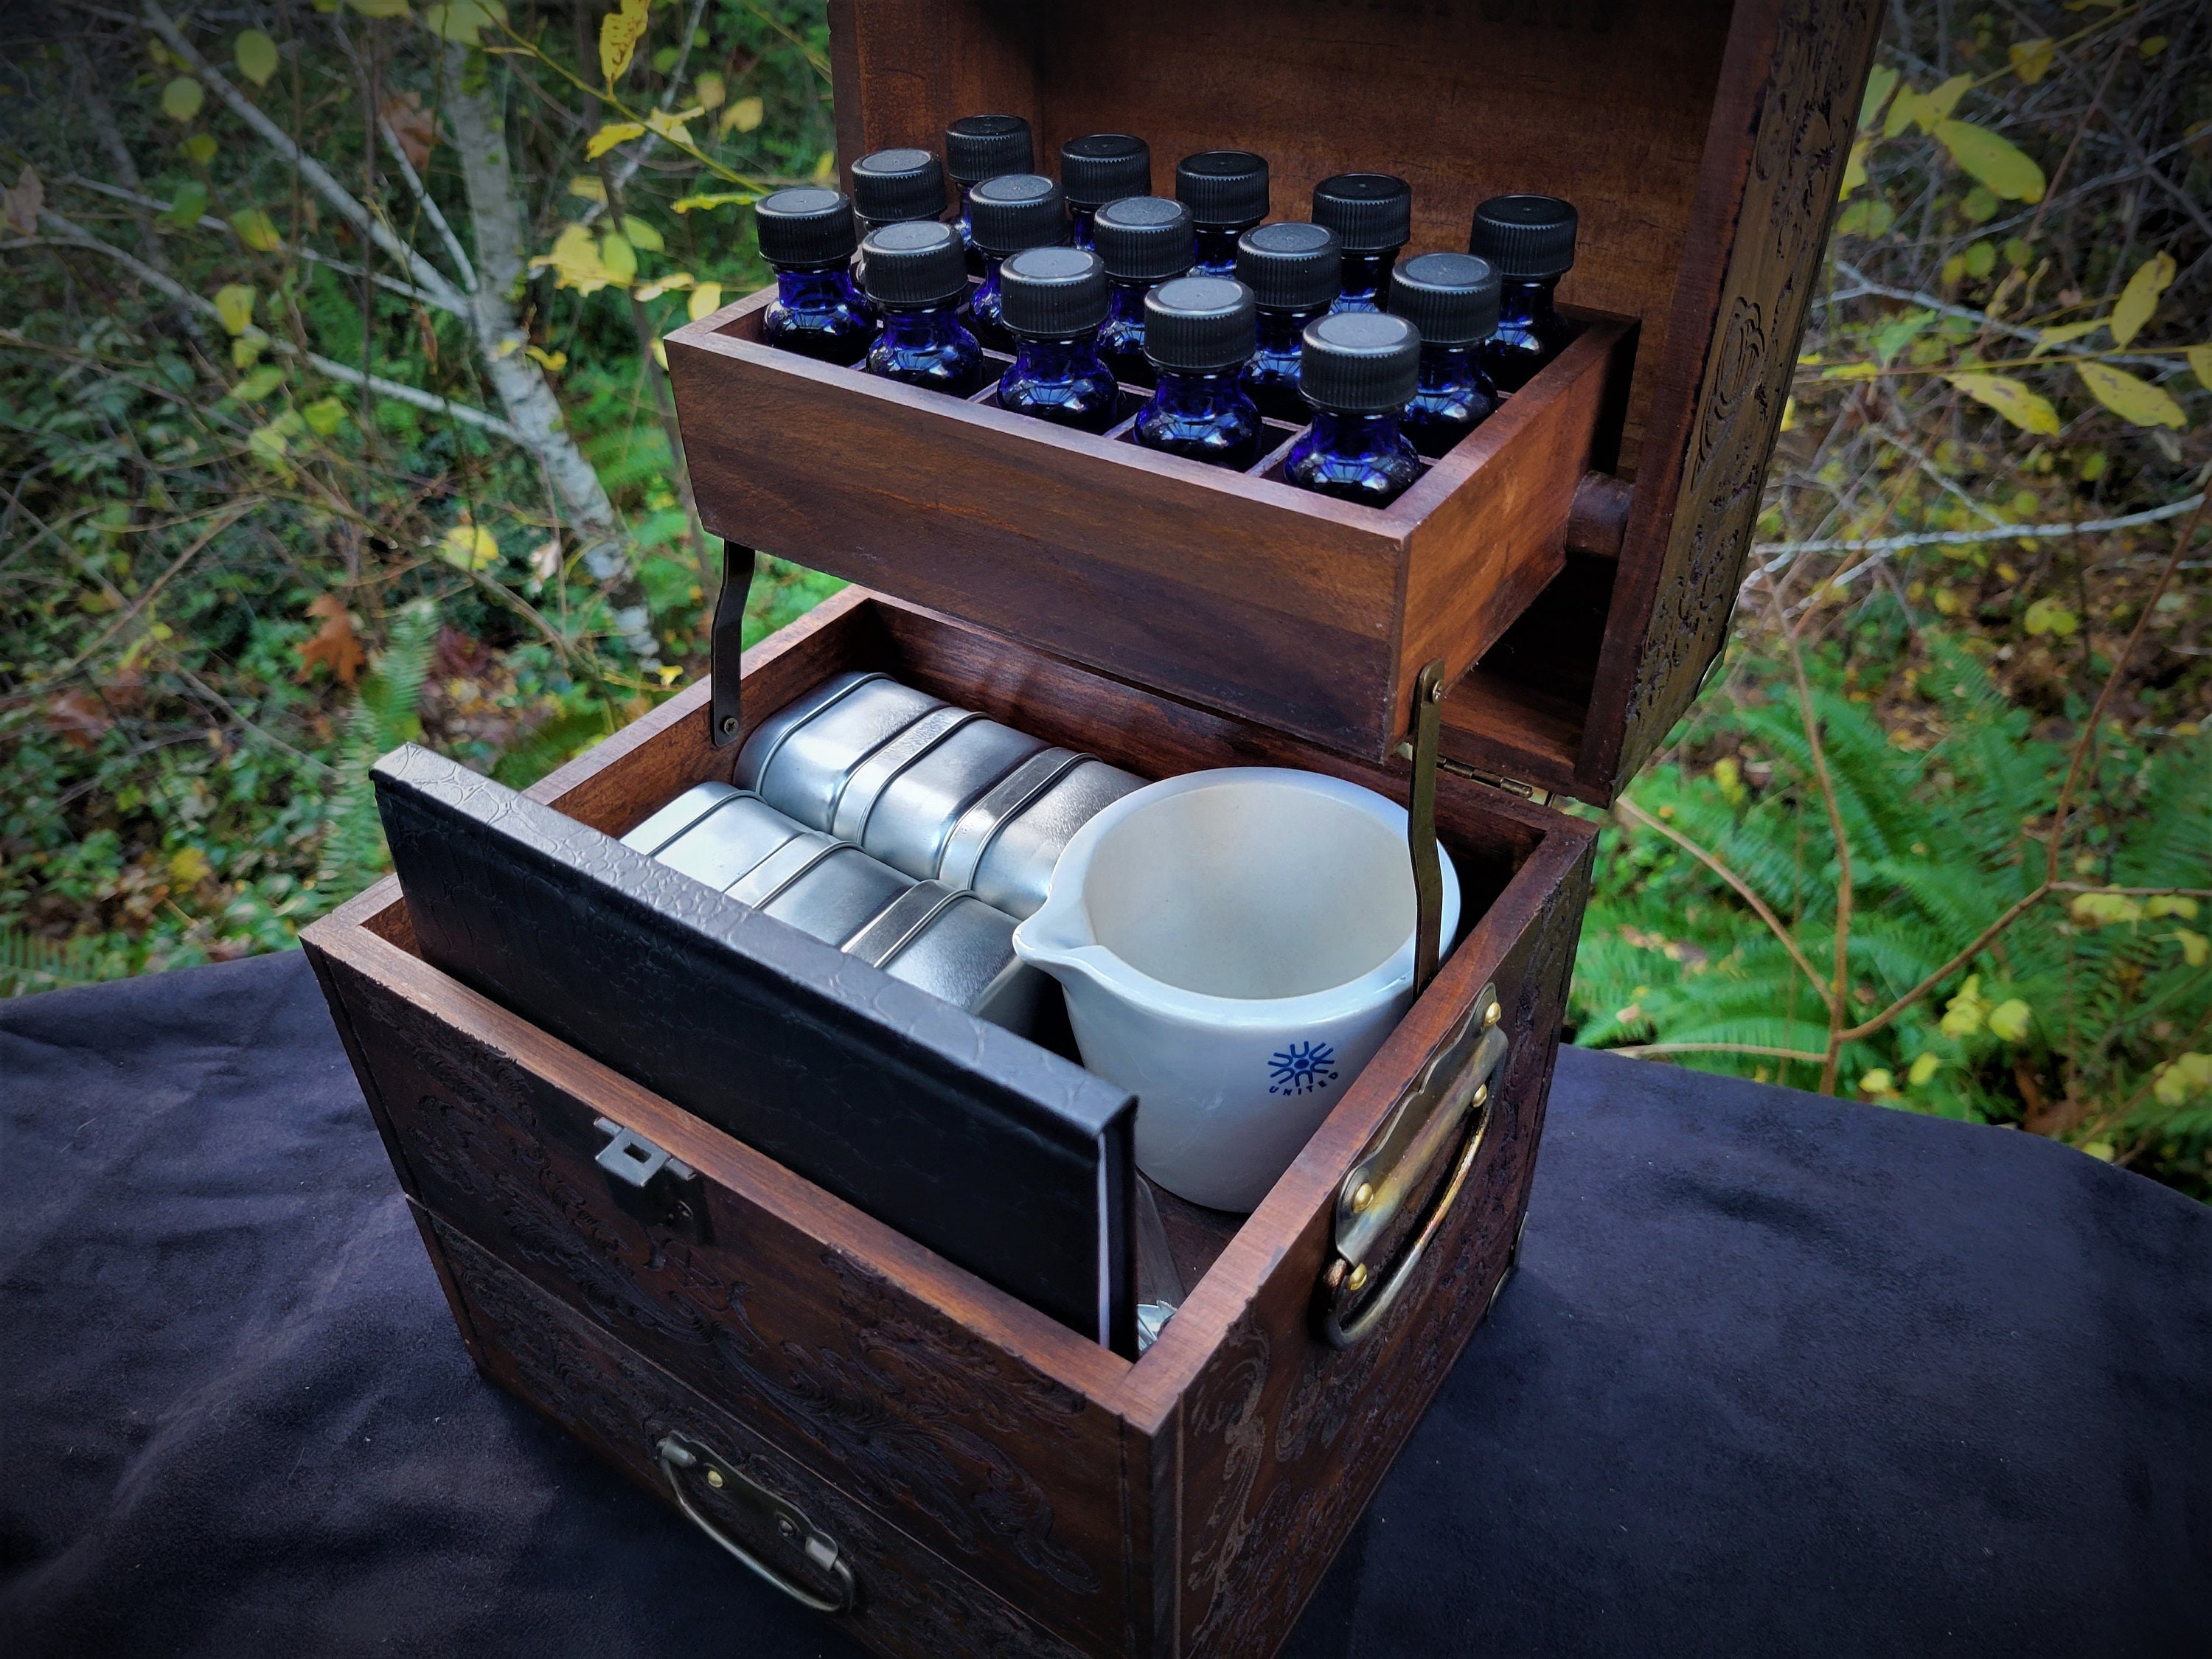 Witches Apothecary Includes Tins, Bottles and More 